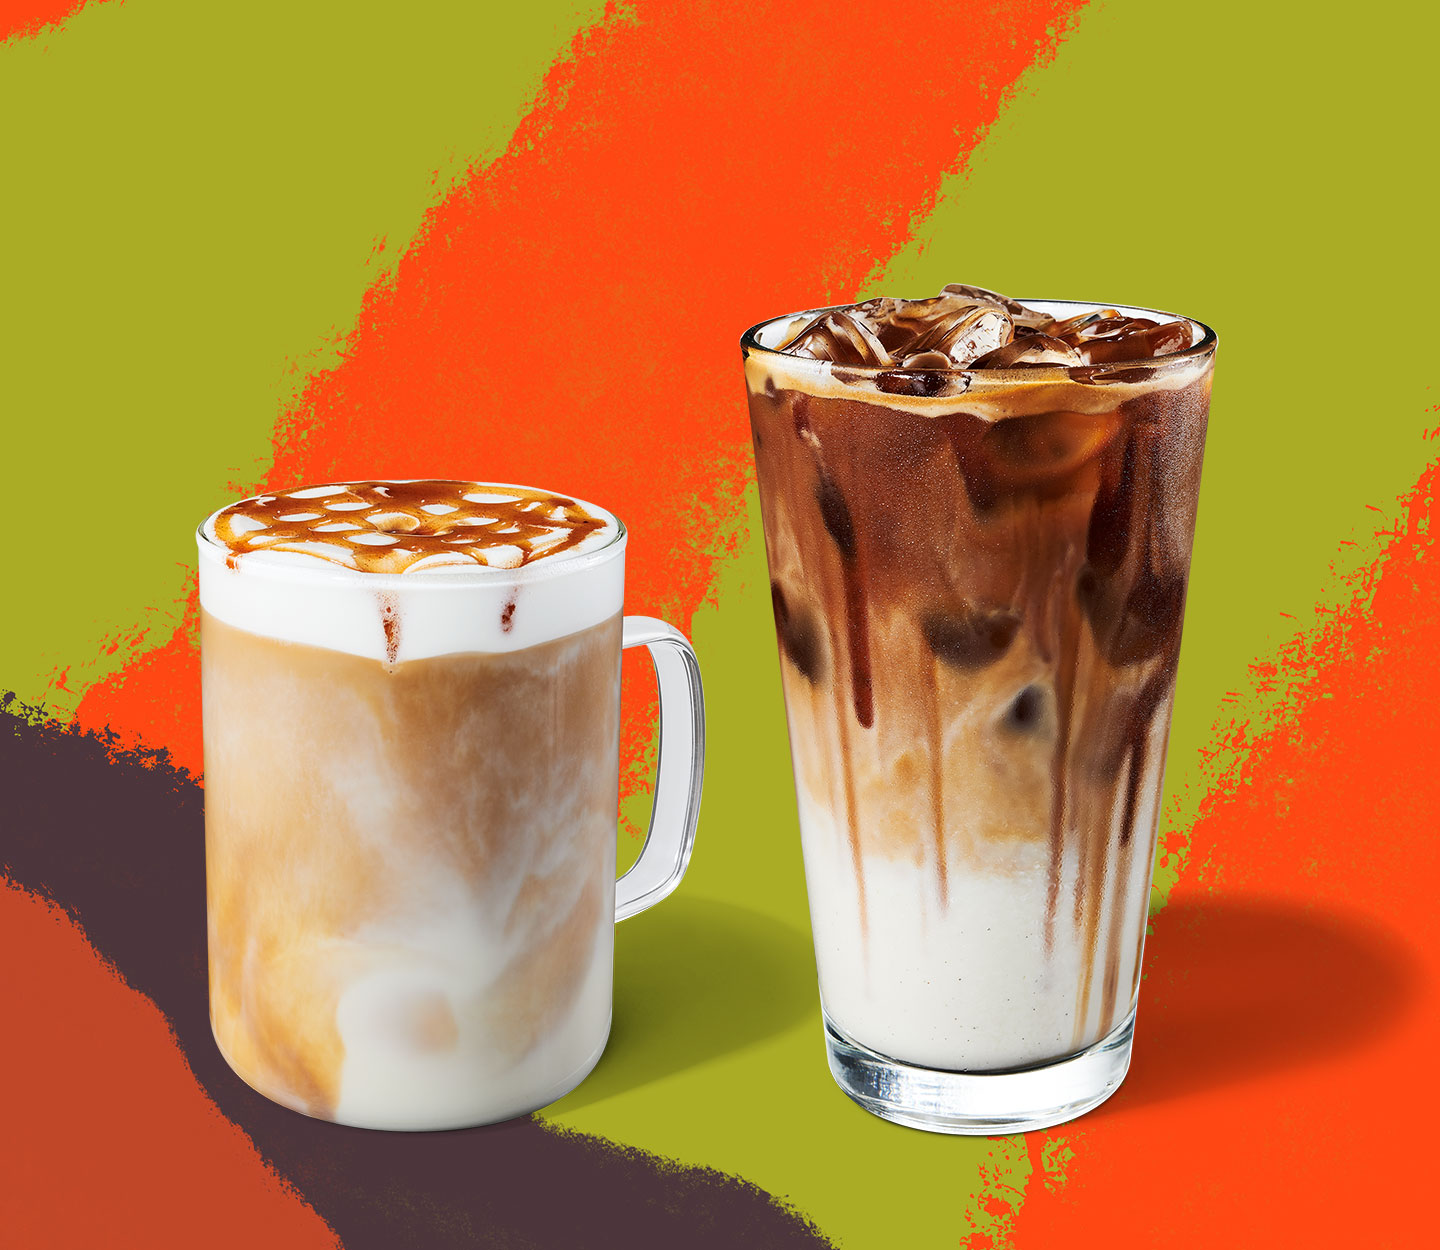 Clear mug contains a coffee drink with foamy top, sitting next to layered iced coffee drink in a tall glass.